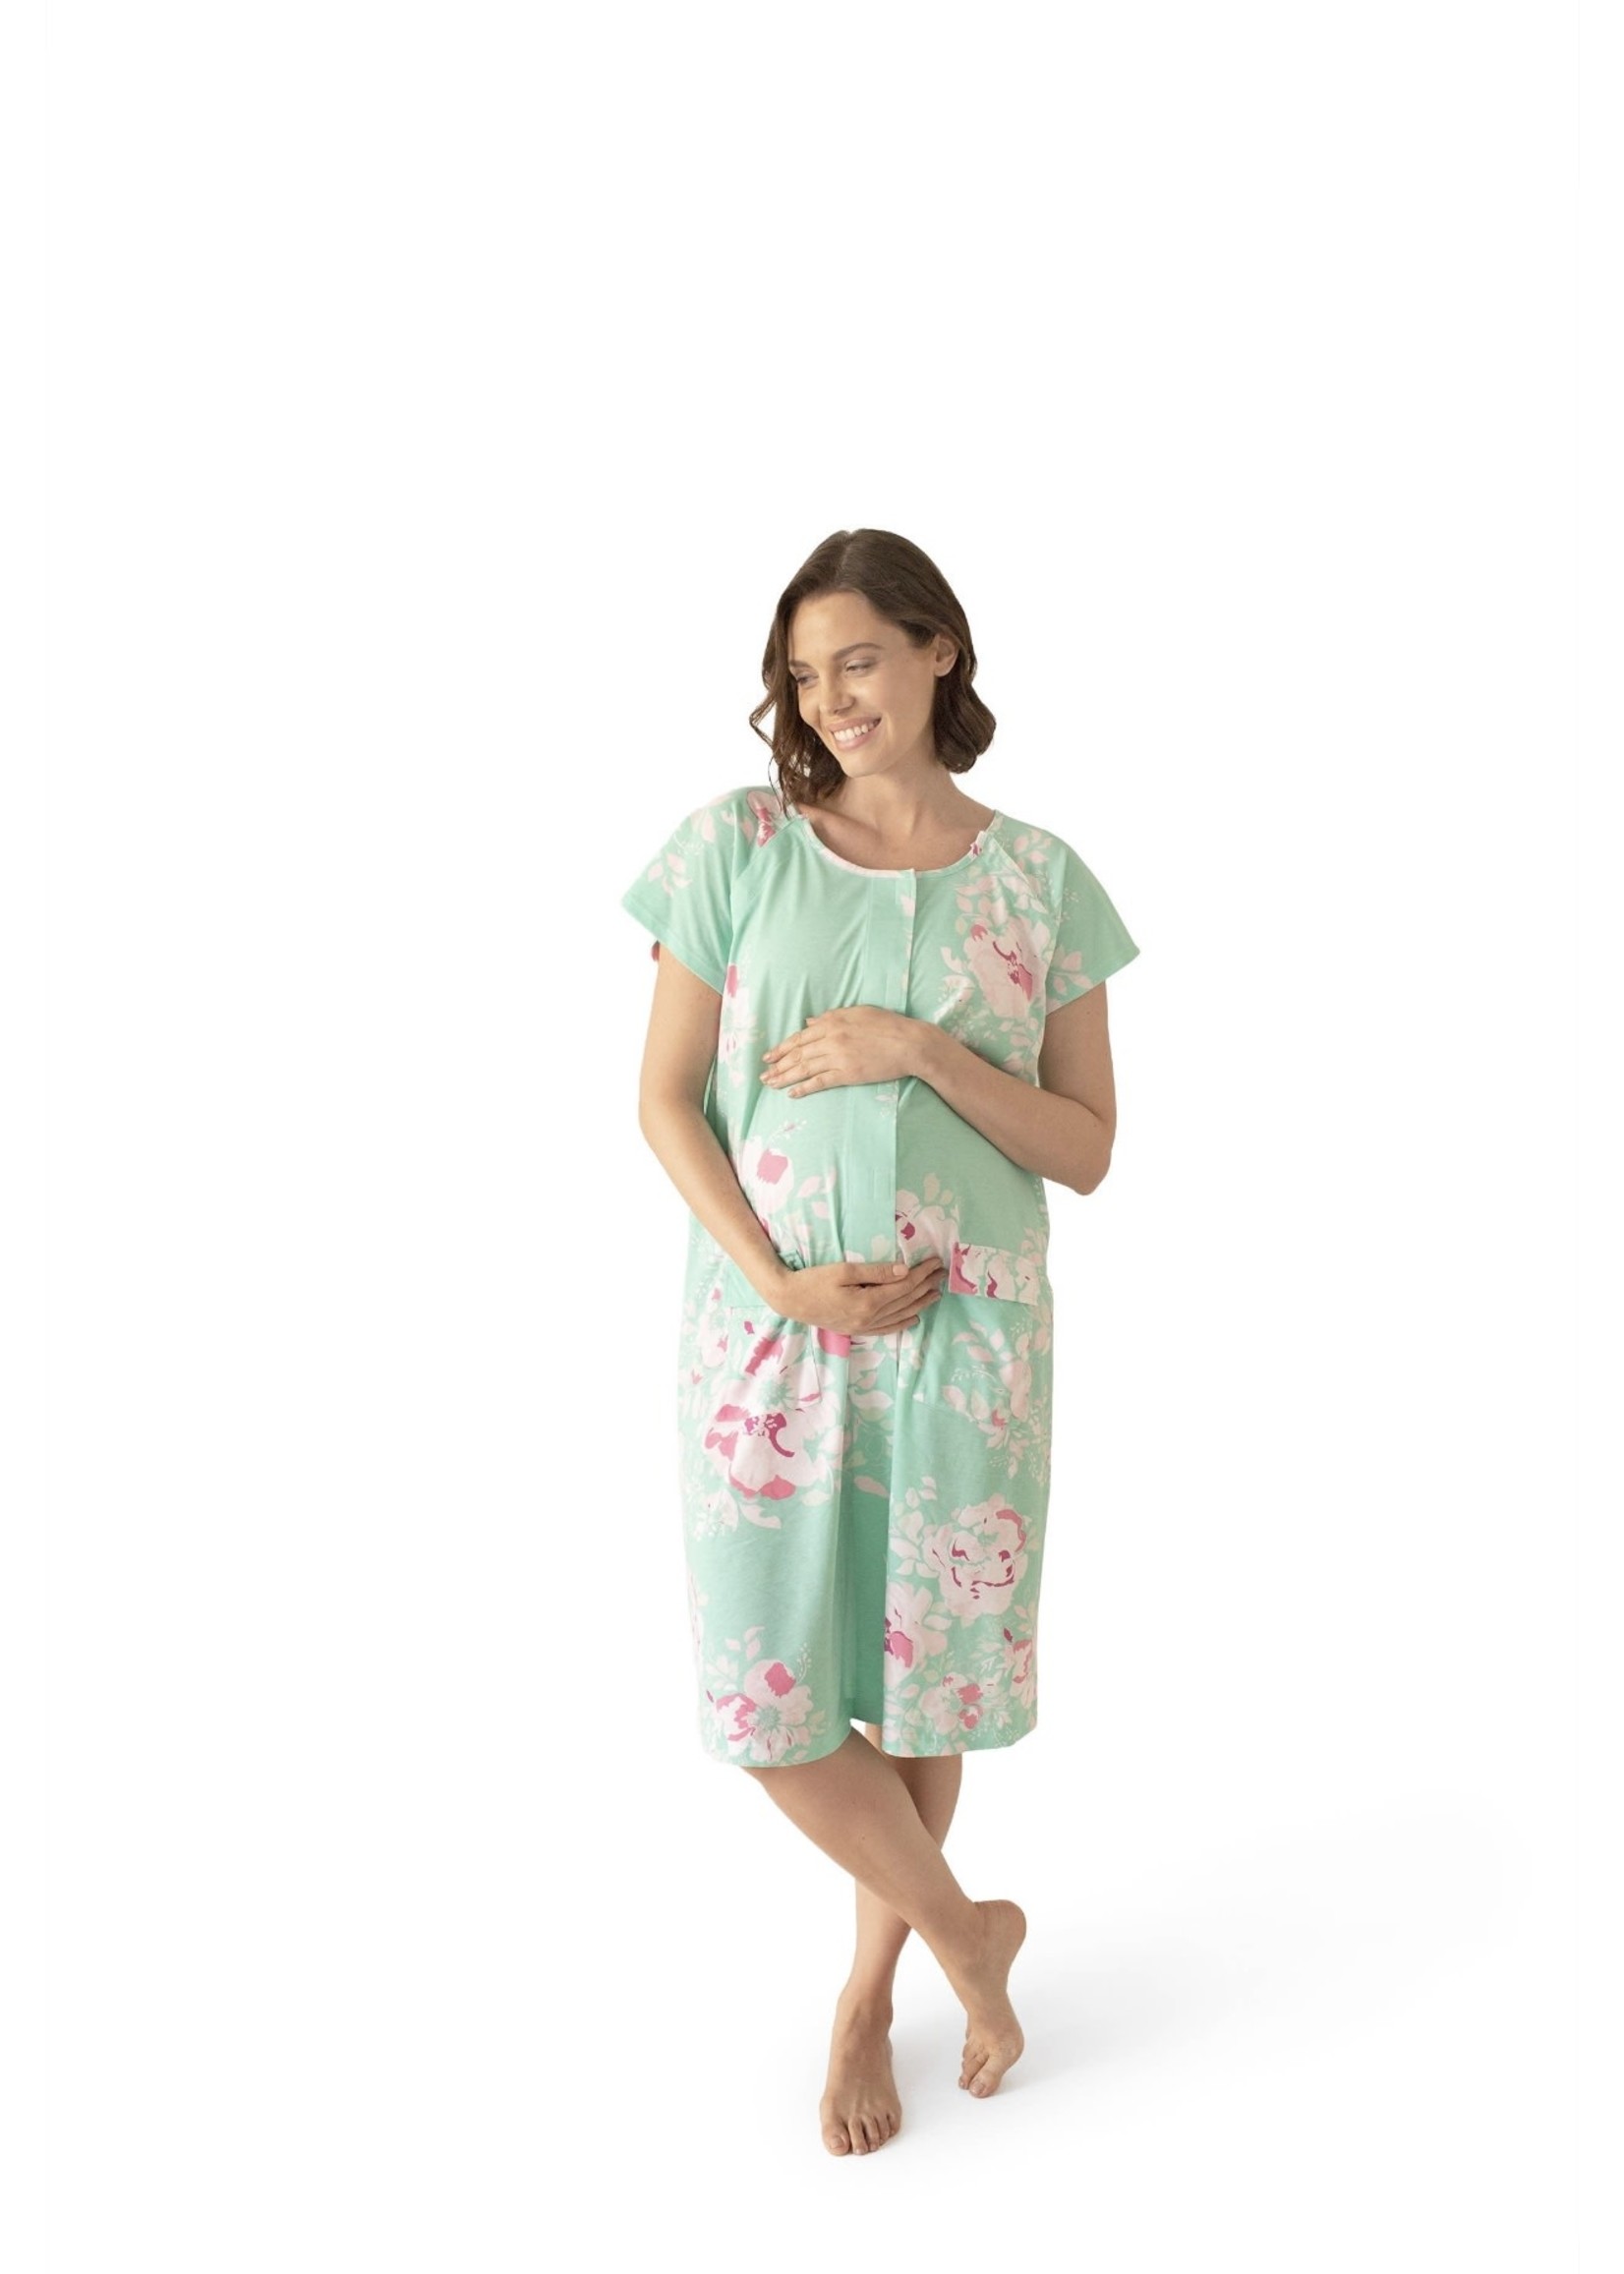 Kindred Bravely Labor & Delivery Gown